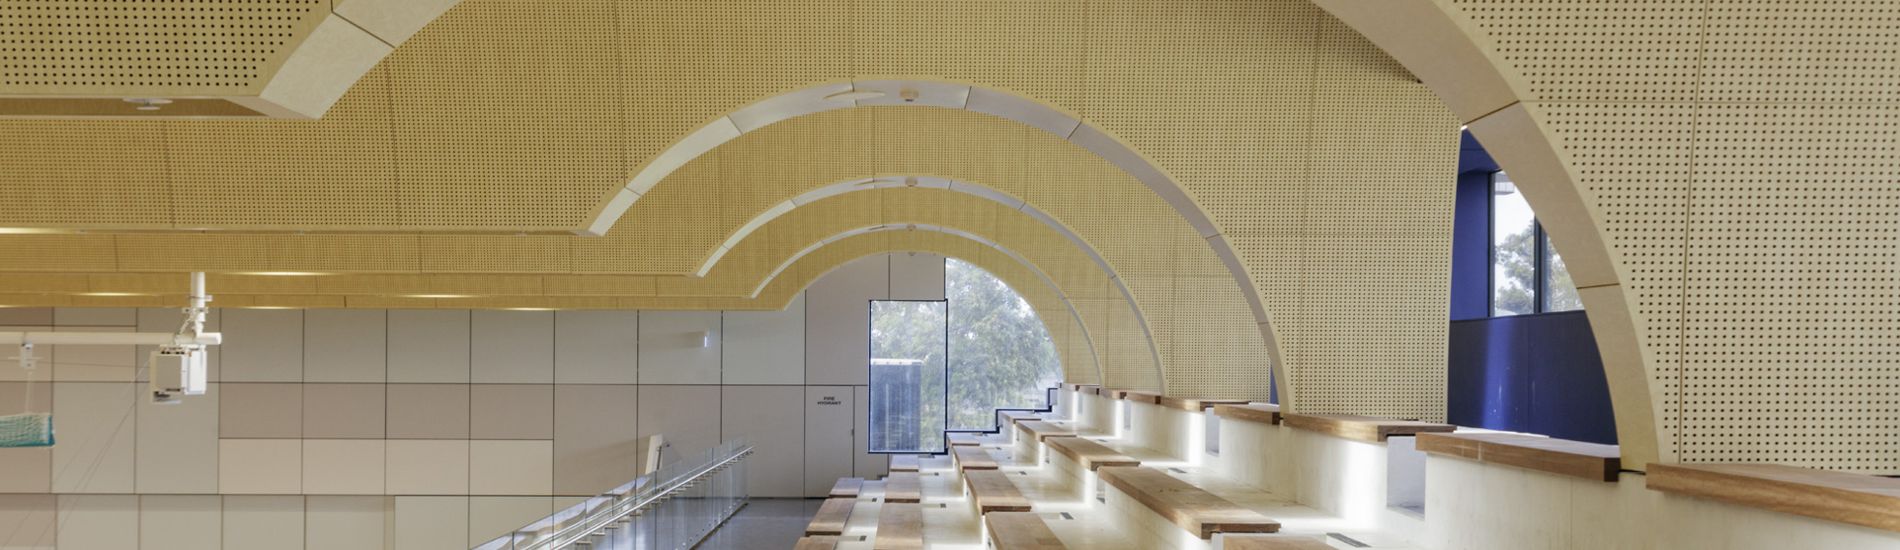 Complex curved acoustic ceiling brings design dreams into reality for school hall